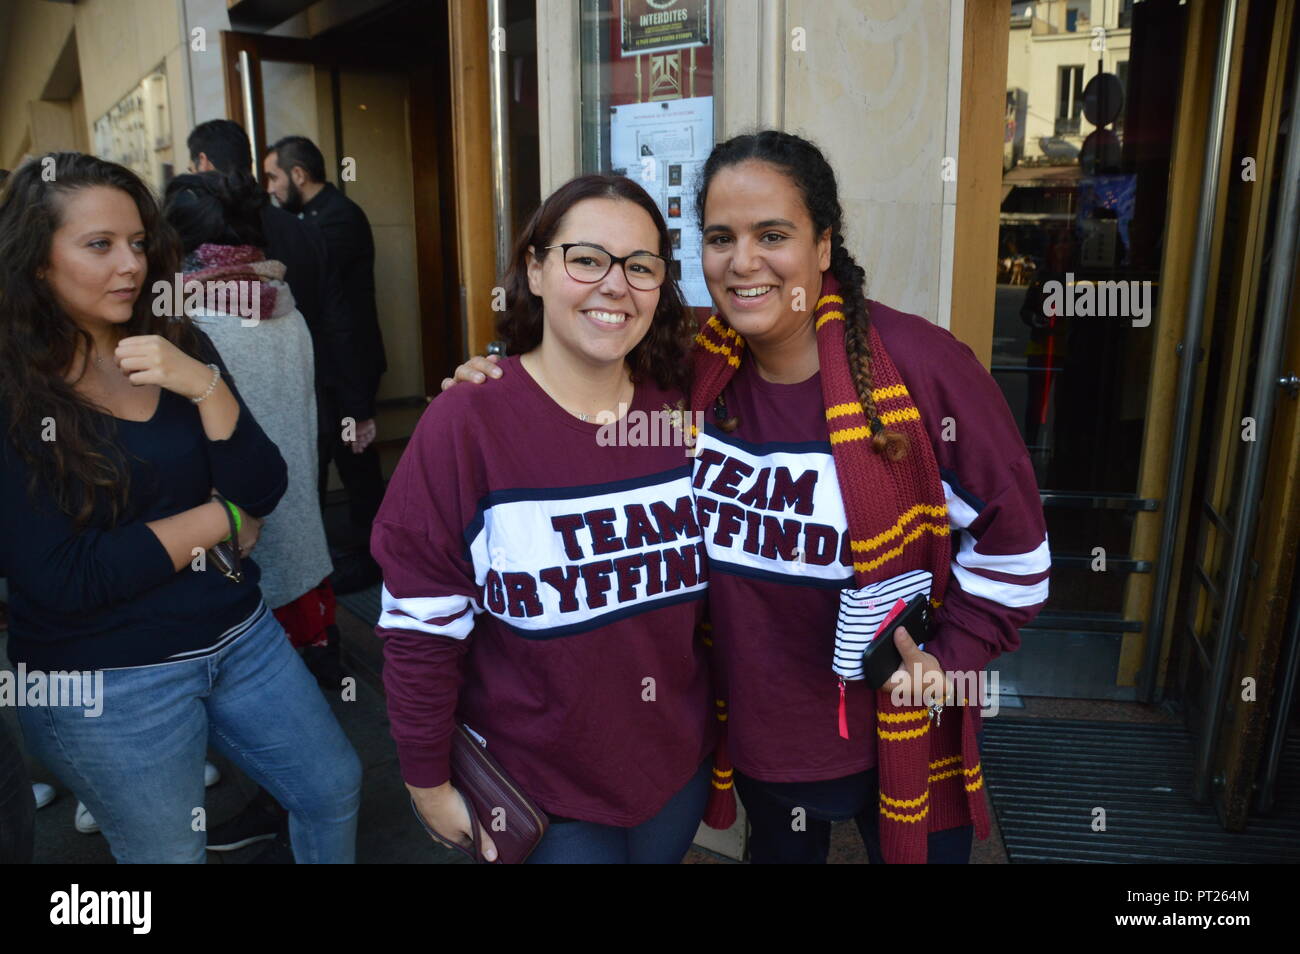 Paris, France. 06th Oct, 2018. Team Gryffindor (Equipe Gryffondor, in french). (Harry Potter wear).Marathon Harry Potter , at the occasion of the release of theÂ  movieÂ Â Fantastic Beasts: The Crimes of Grindelwald.Â Â . Paris,France. Cinema Grand Rex.6 october 2018 .11h-23h October 2018 . 10h  ALPHACIT NEWIM / Alamy Live News Credit: Alphacit NEWIM/Alamy Live News Stock Photo